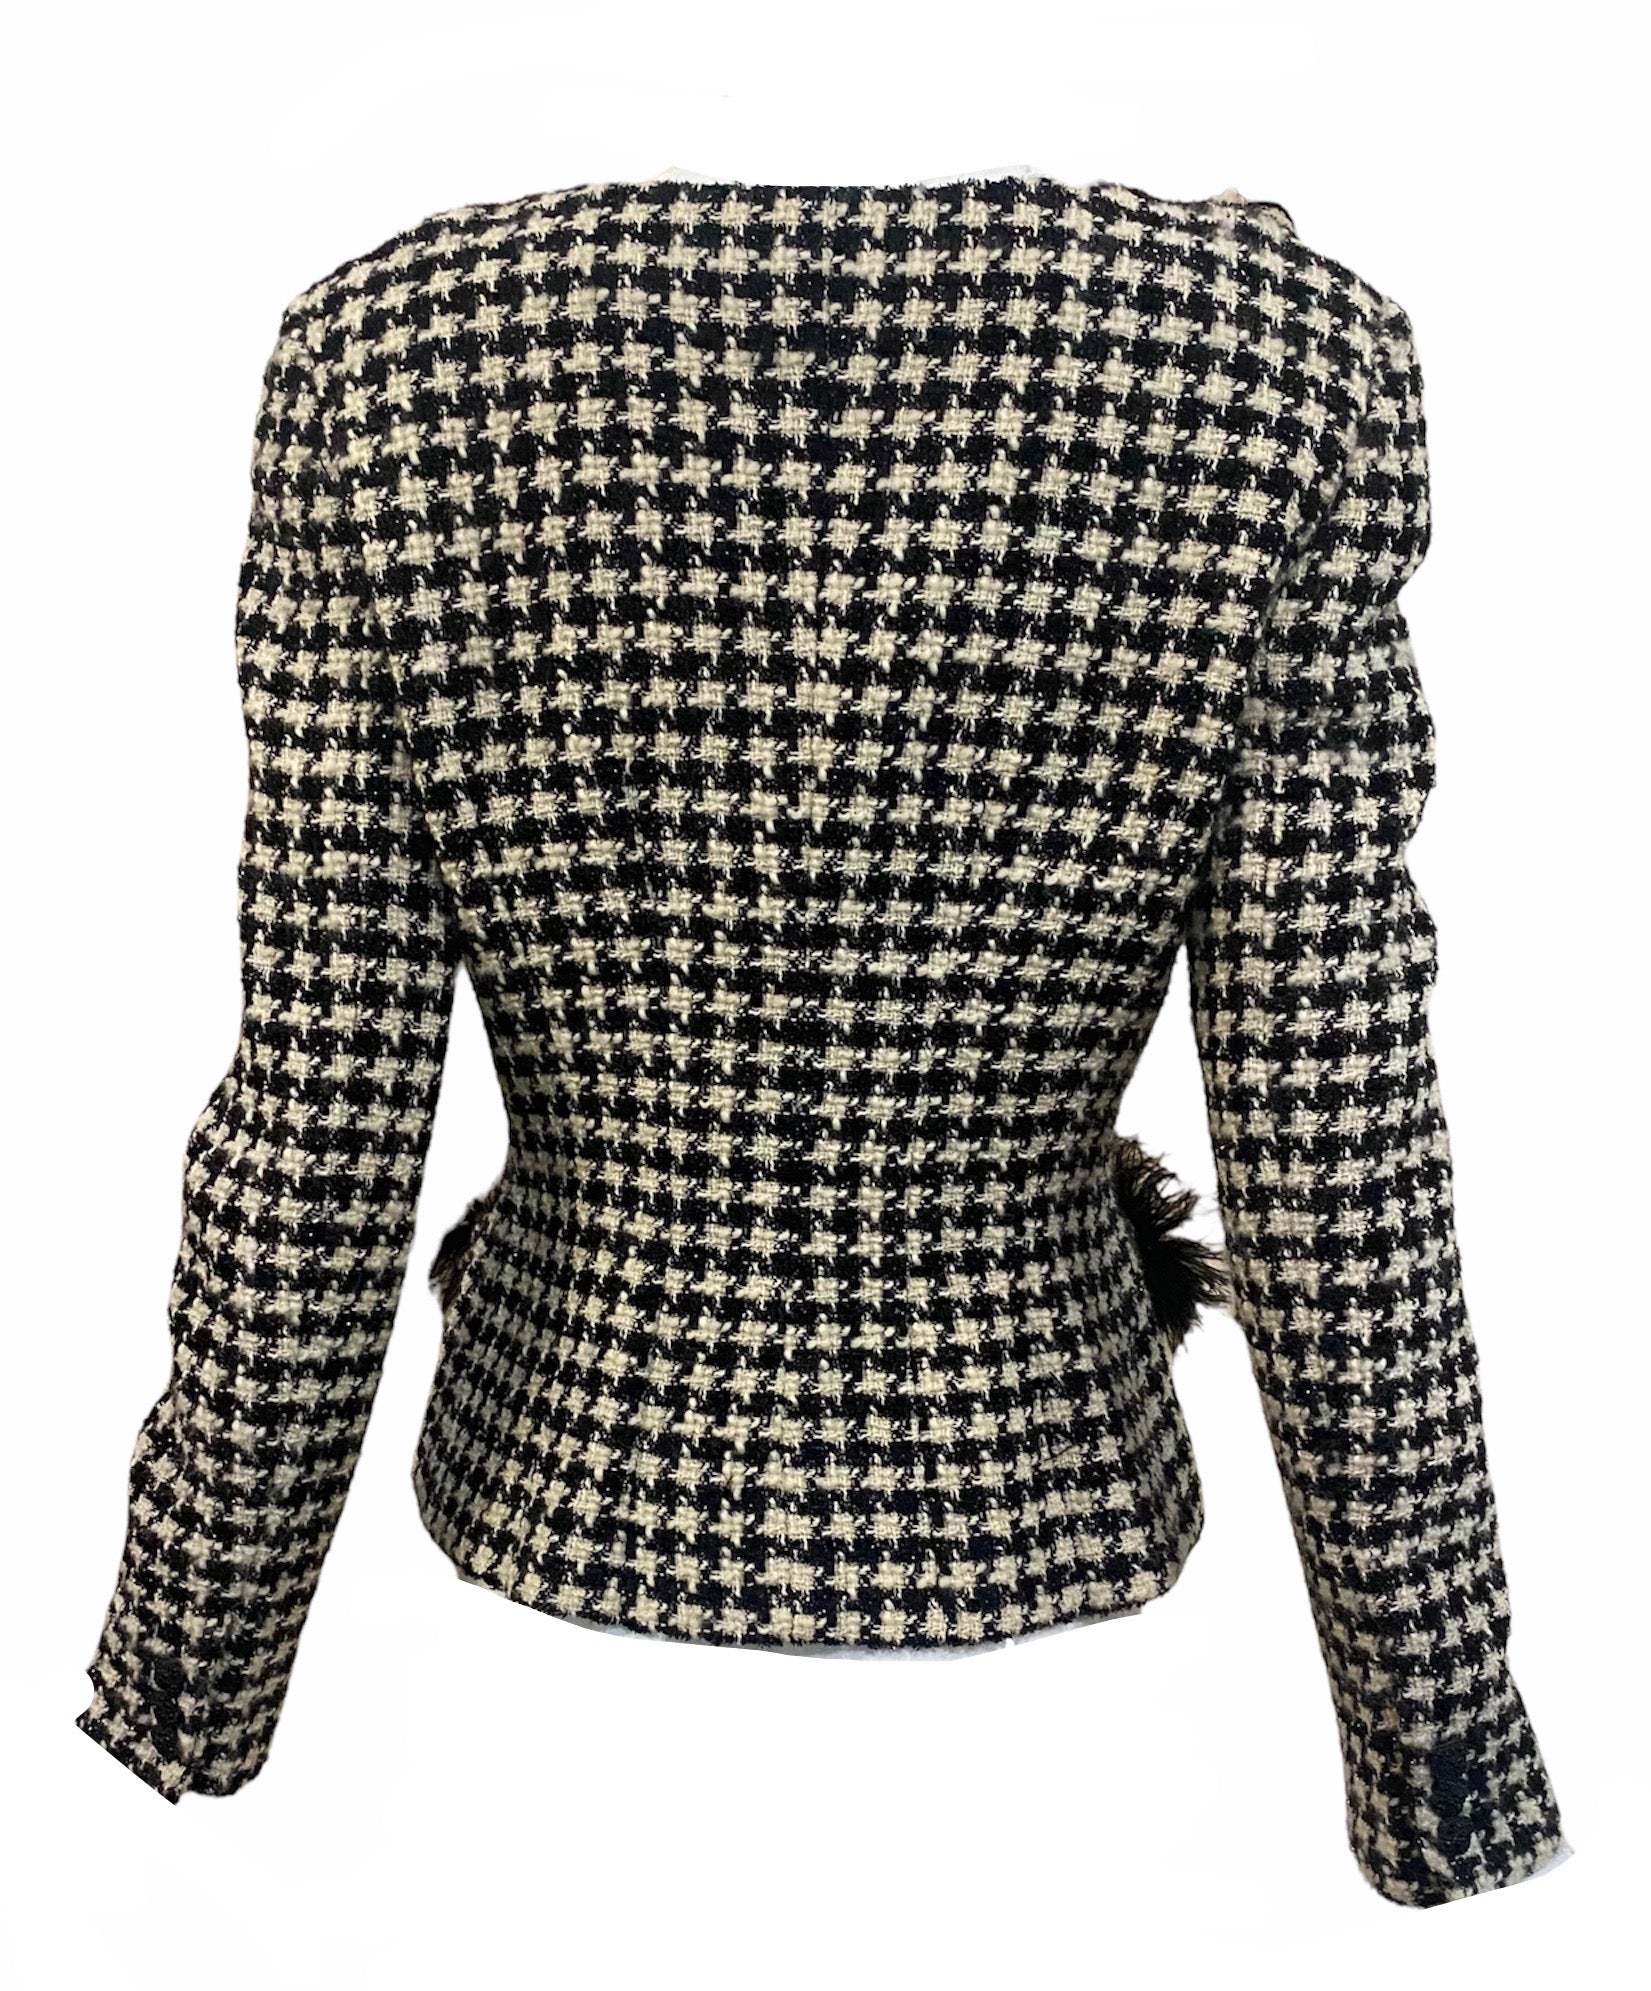 Valentino 80s Black and White Houndstooth Evening Jacket with Marabou Accents, back